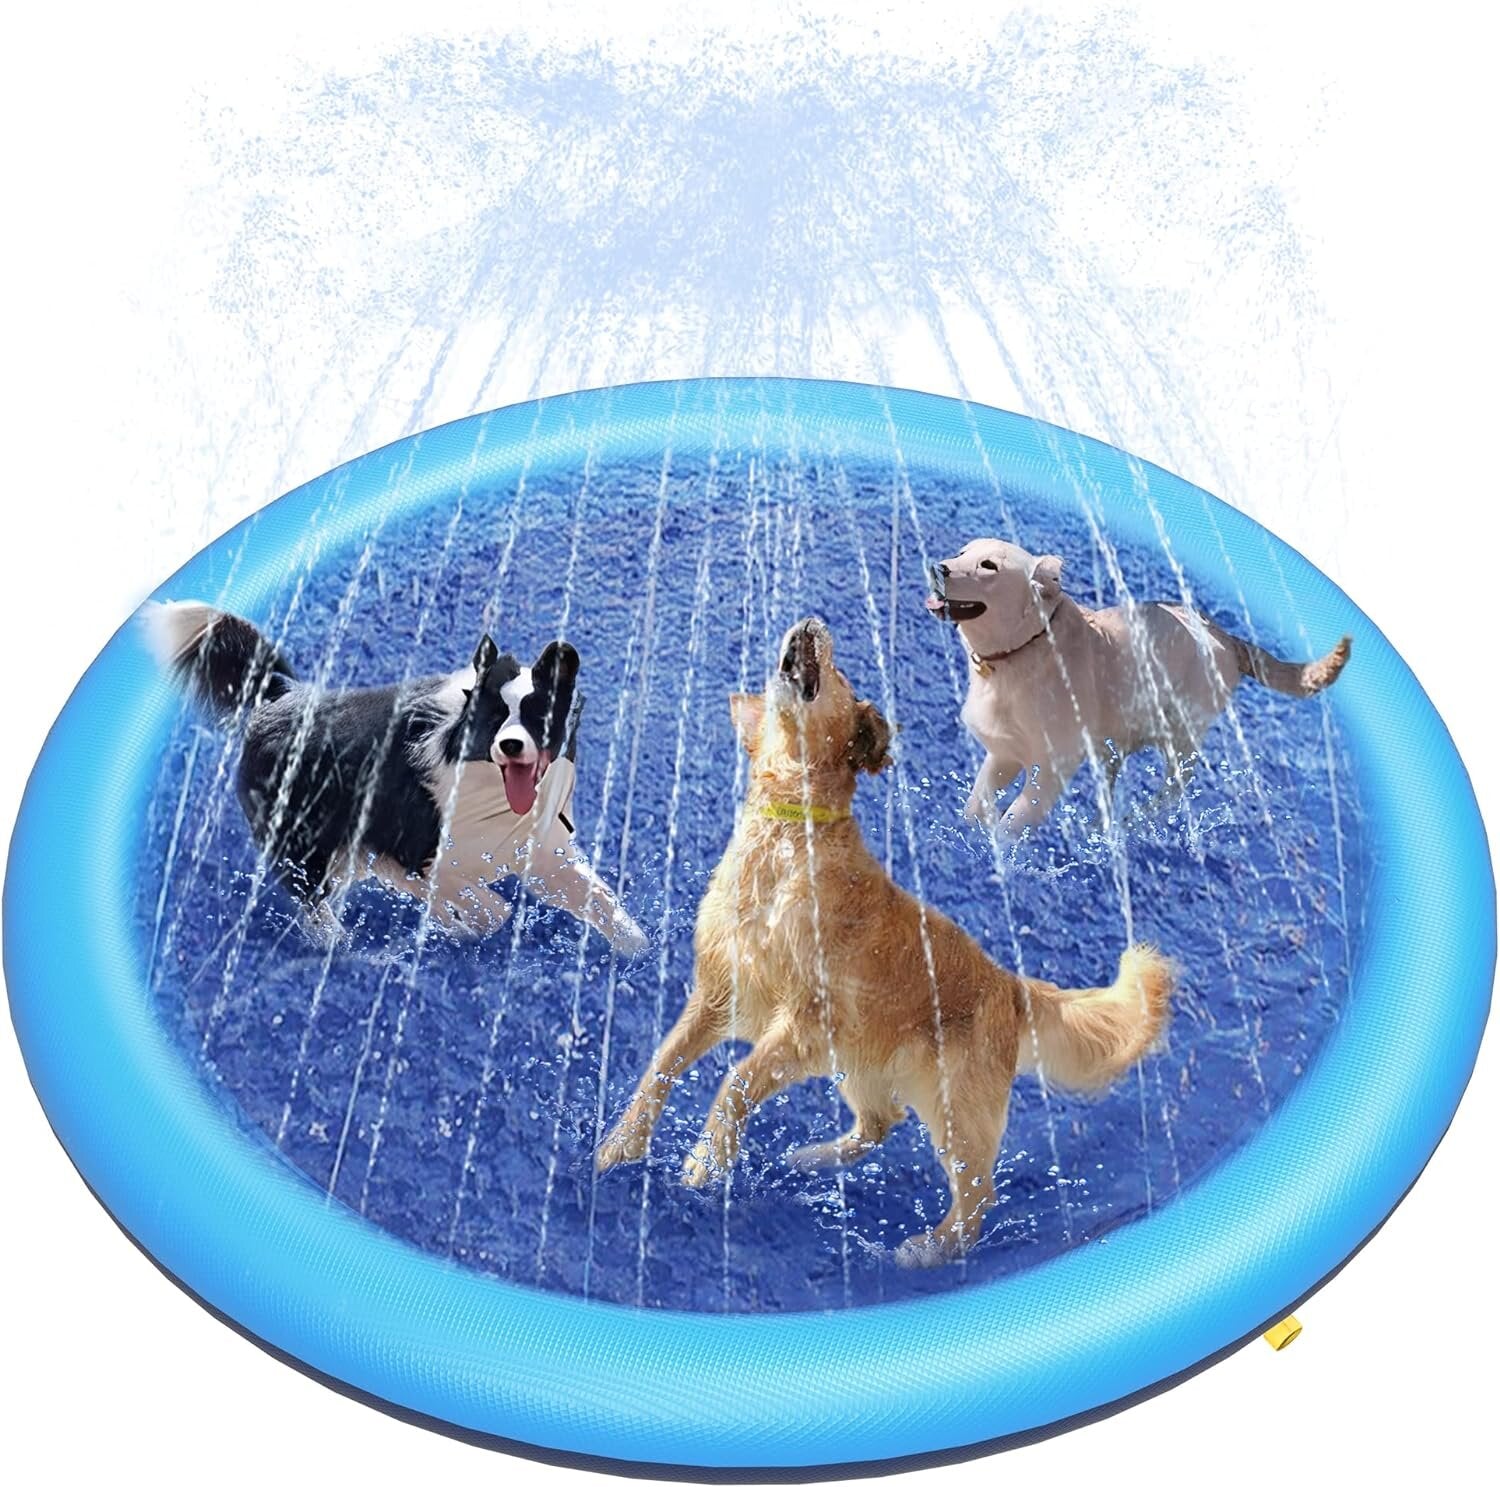 Safe Summer Fun with Our Non-Slip Splash Pad for Kids and Pets